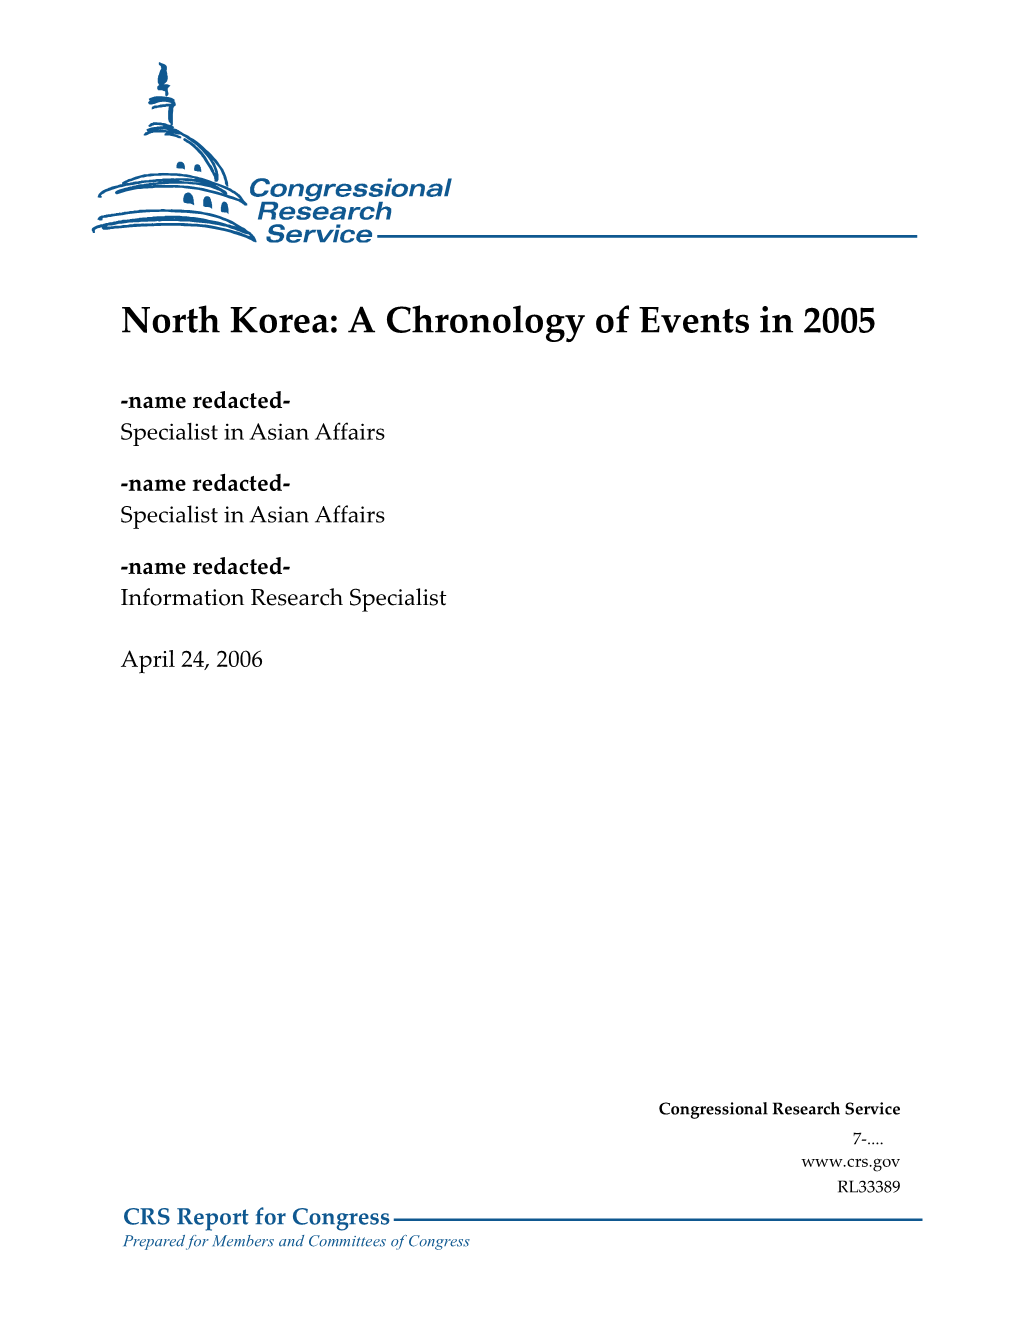 North Korea: a Chronology of Events in 2005